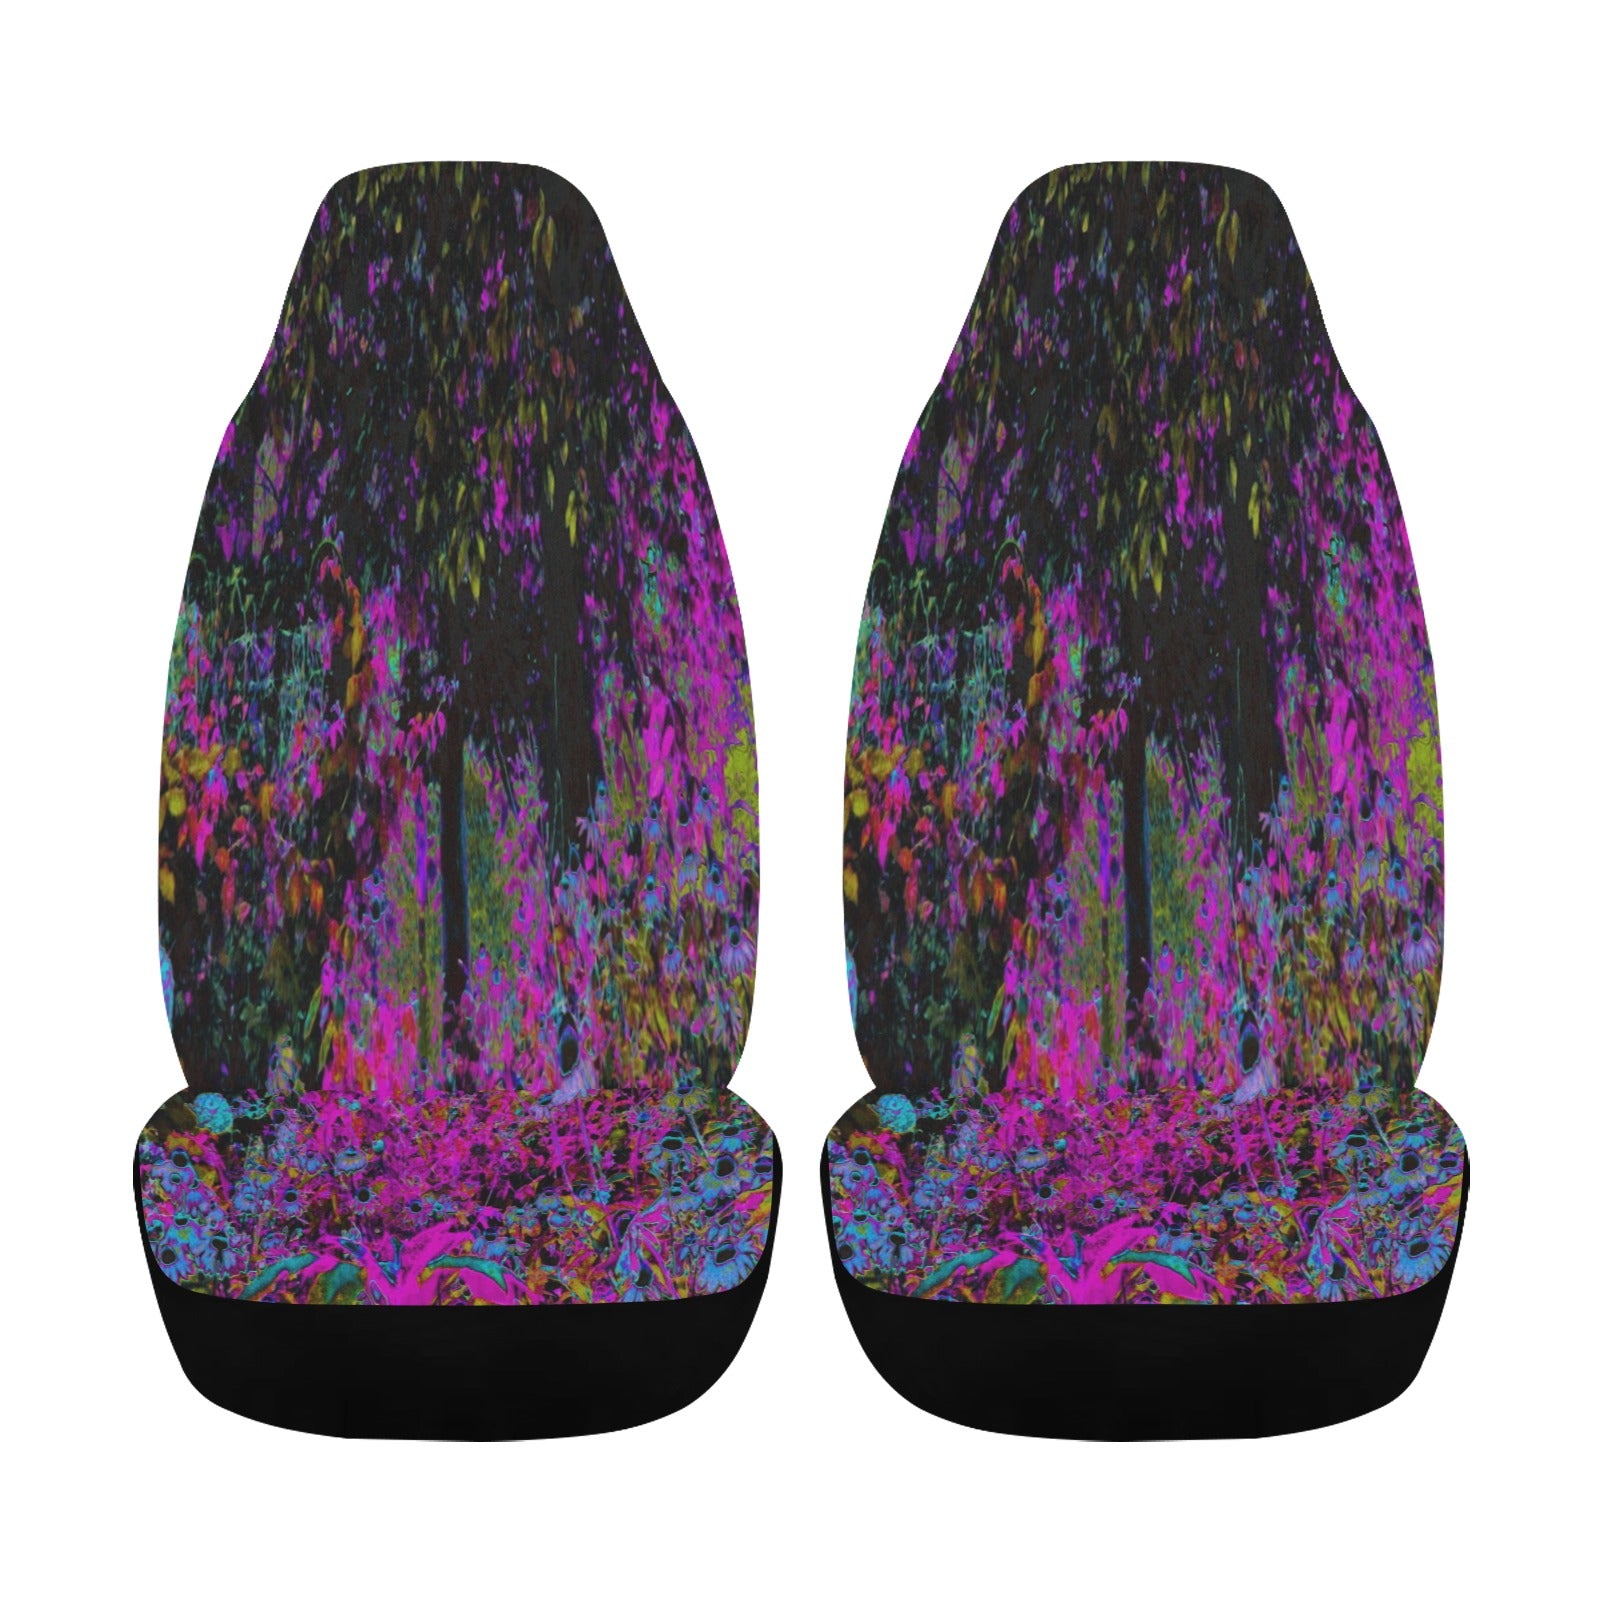 Car Seat Covers, Psychedelic Hot Pink and Black Garden Sunrise